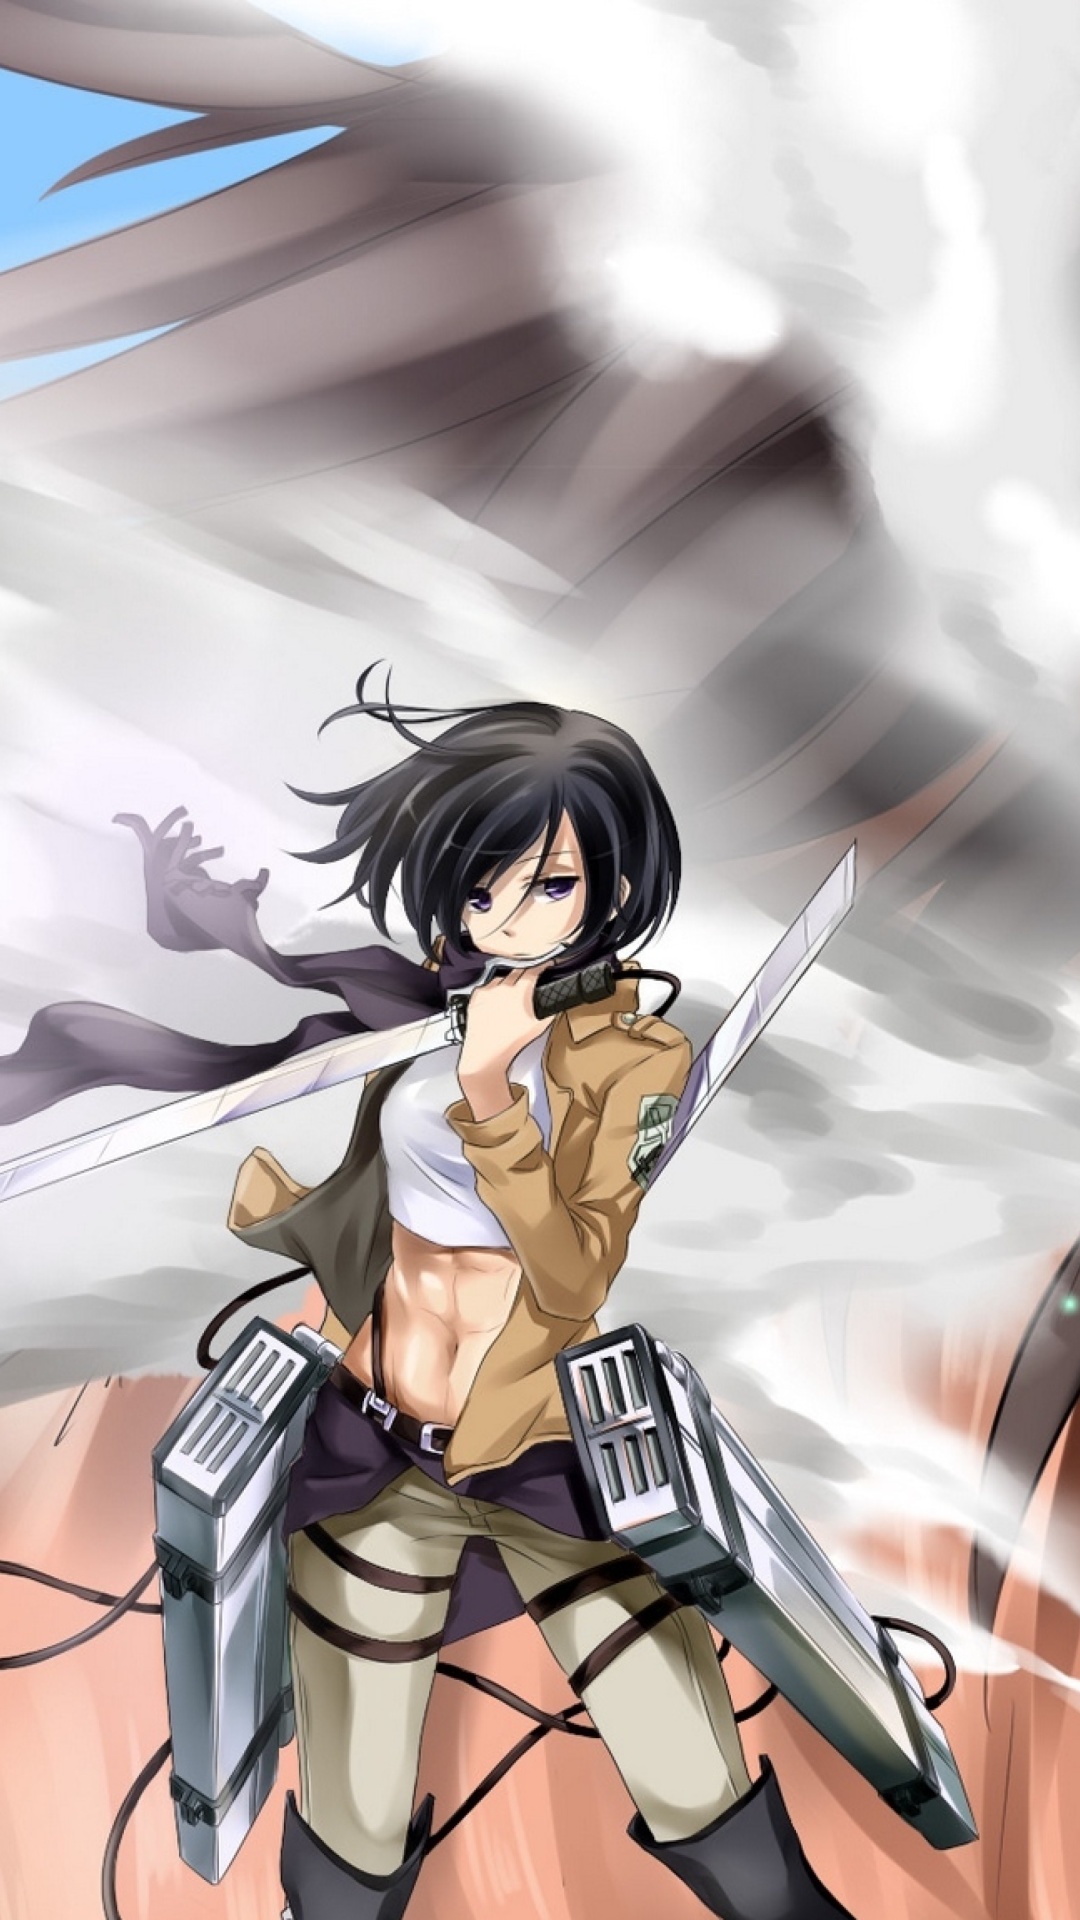 Attack on Titan with Eren and Mikasa screenshot #1 1080x1920